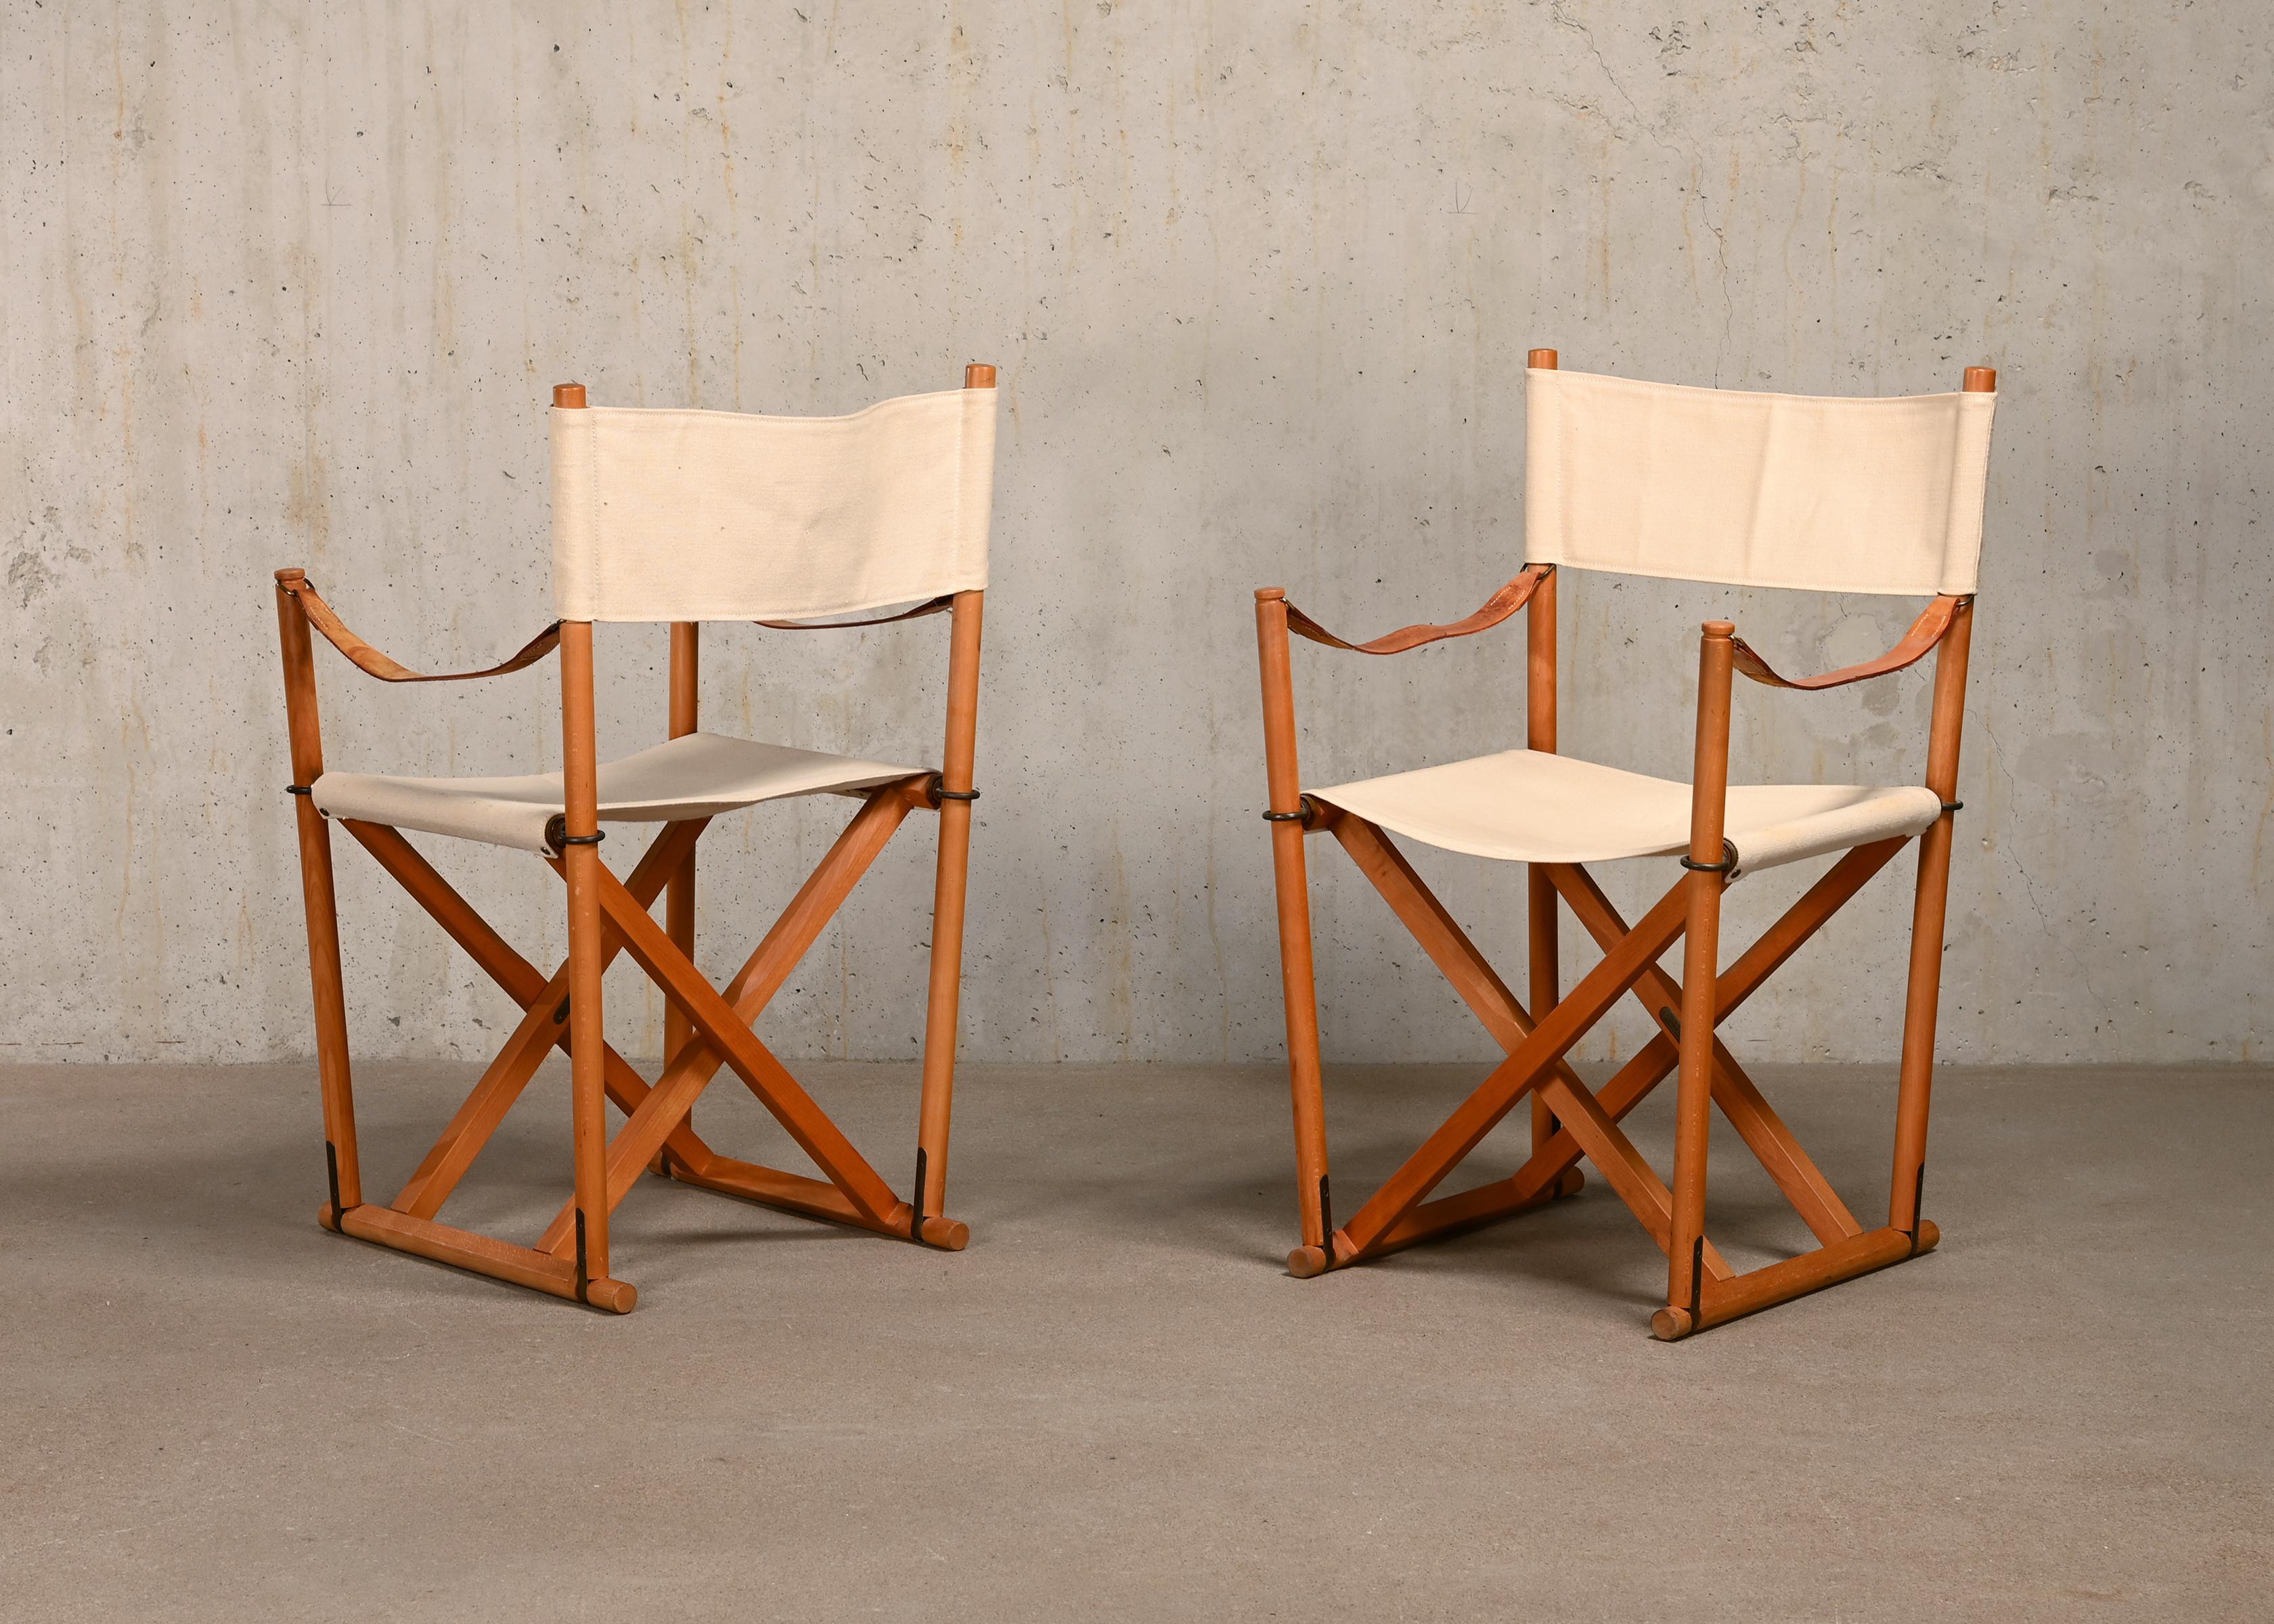 Mid-20th Century Mogens Koch MK16 Folding Chair in Beech Wood and Canvas for Rud Rasmussen, DK